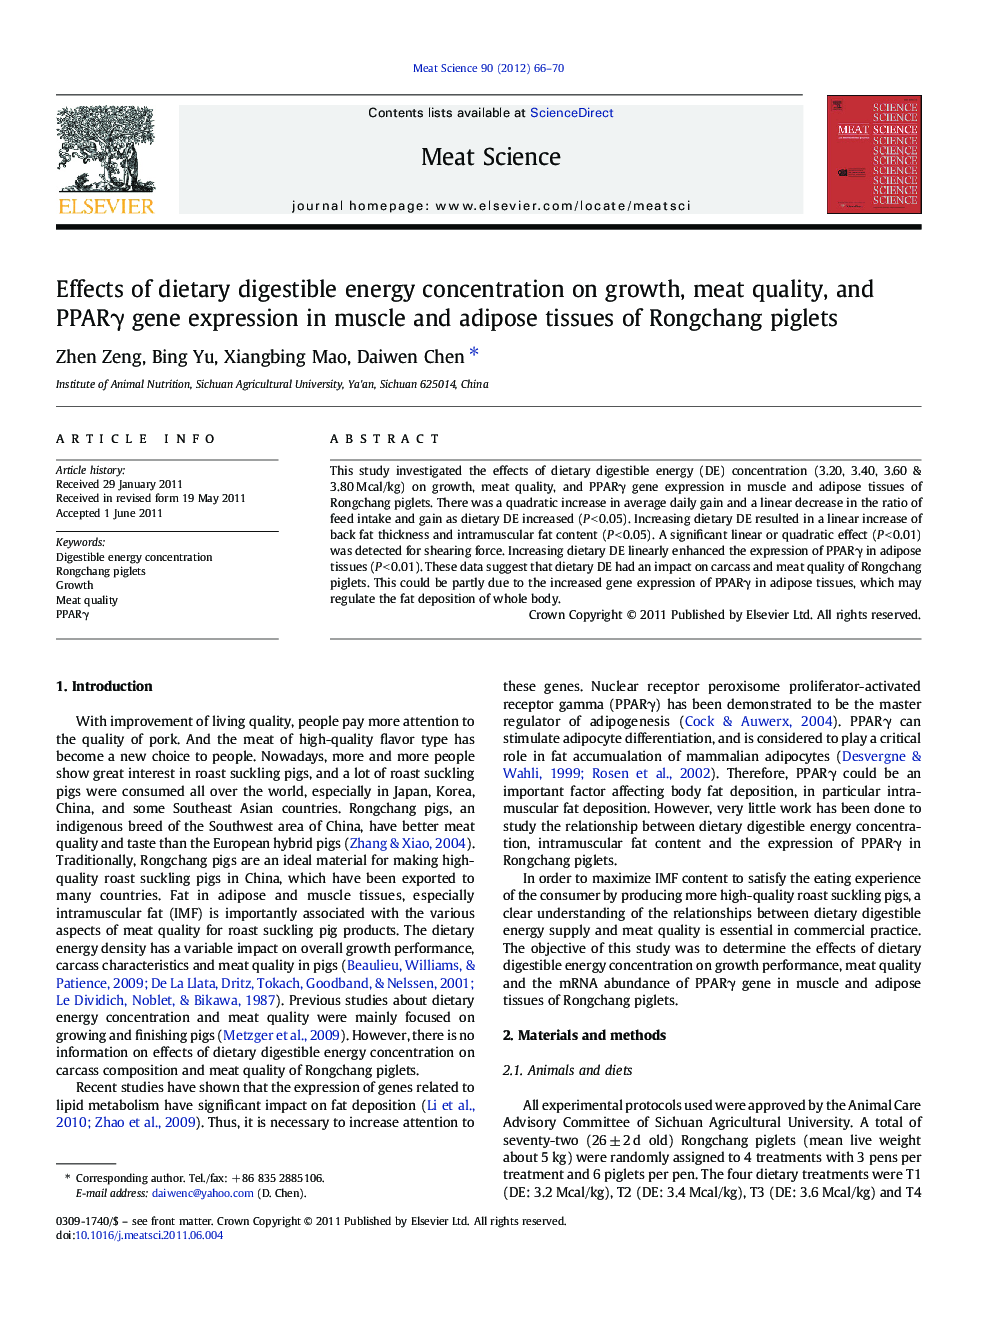 Effects of dietary digestible energy concentration on growth, meat quality, and PPARÎ³ gene expression in muscle and adipose tissues of Rongchang piglets